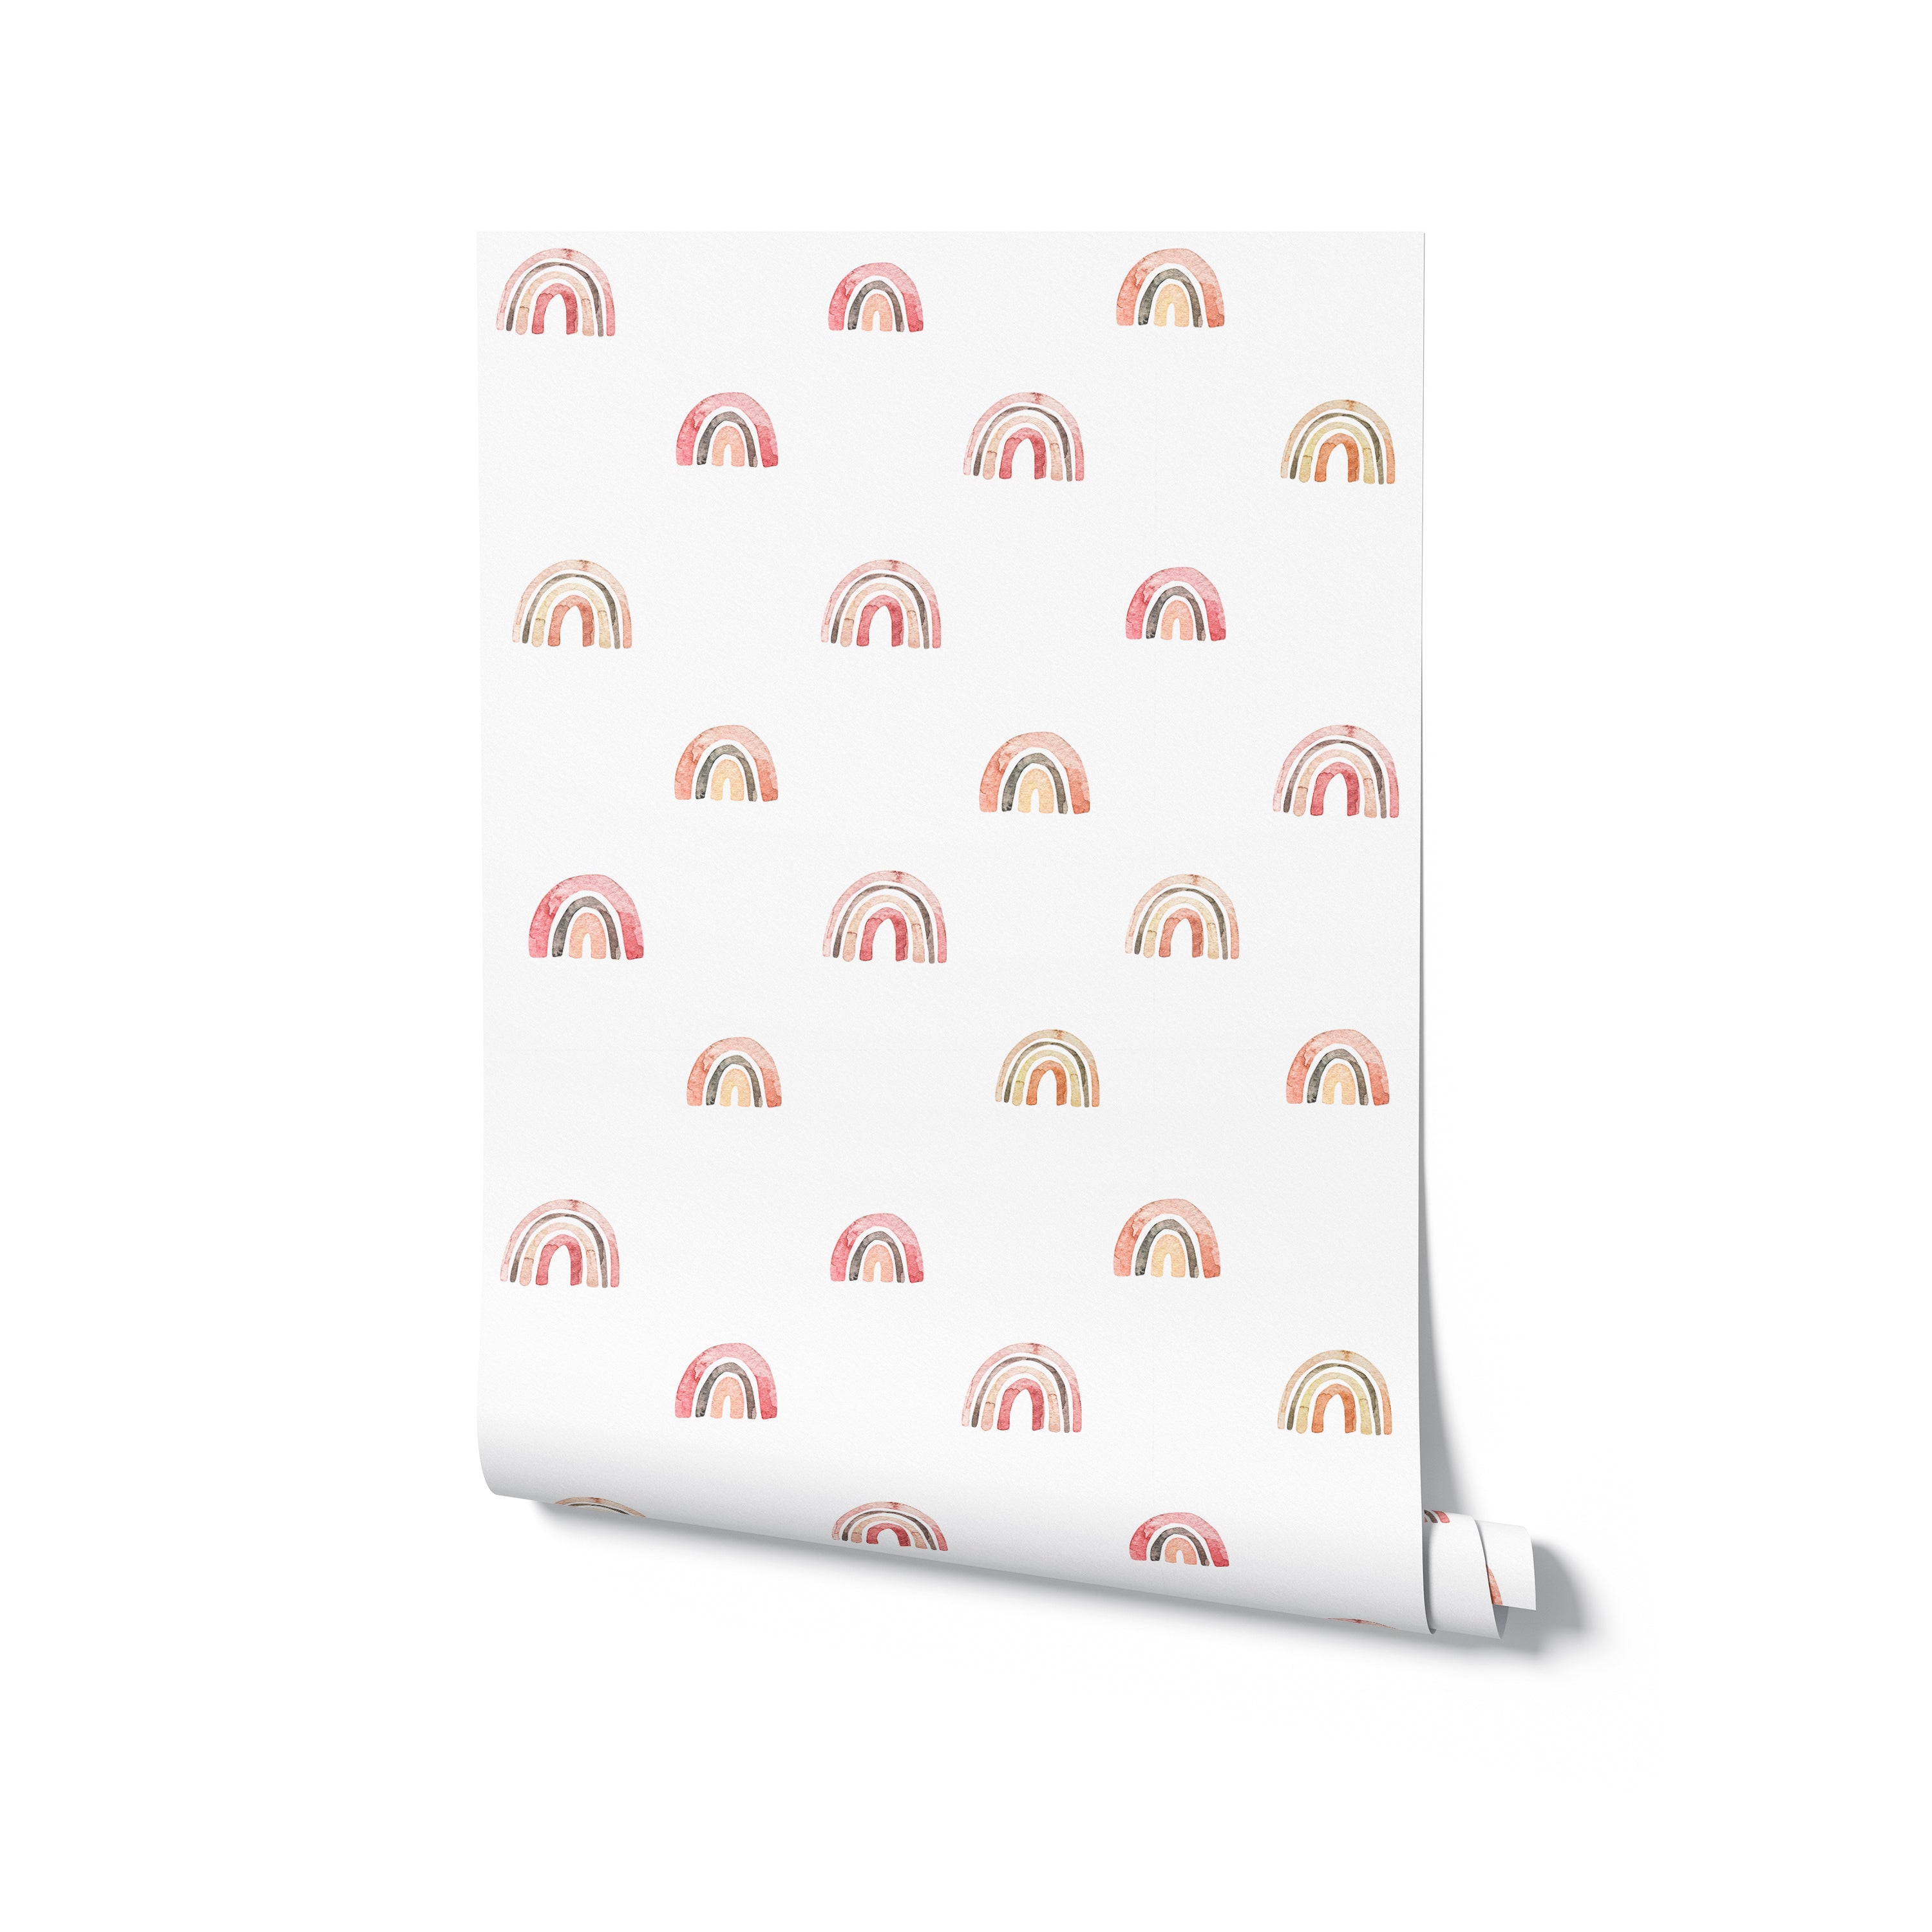 A rolled piece of Watercolor Rainbow Wallpaper featuring a charming array of small watercolor rainbows in muted tones of pink and beige with golden highlights, set against a pure white background for a gentle, nursery-friendly design.